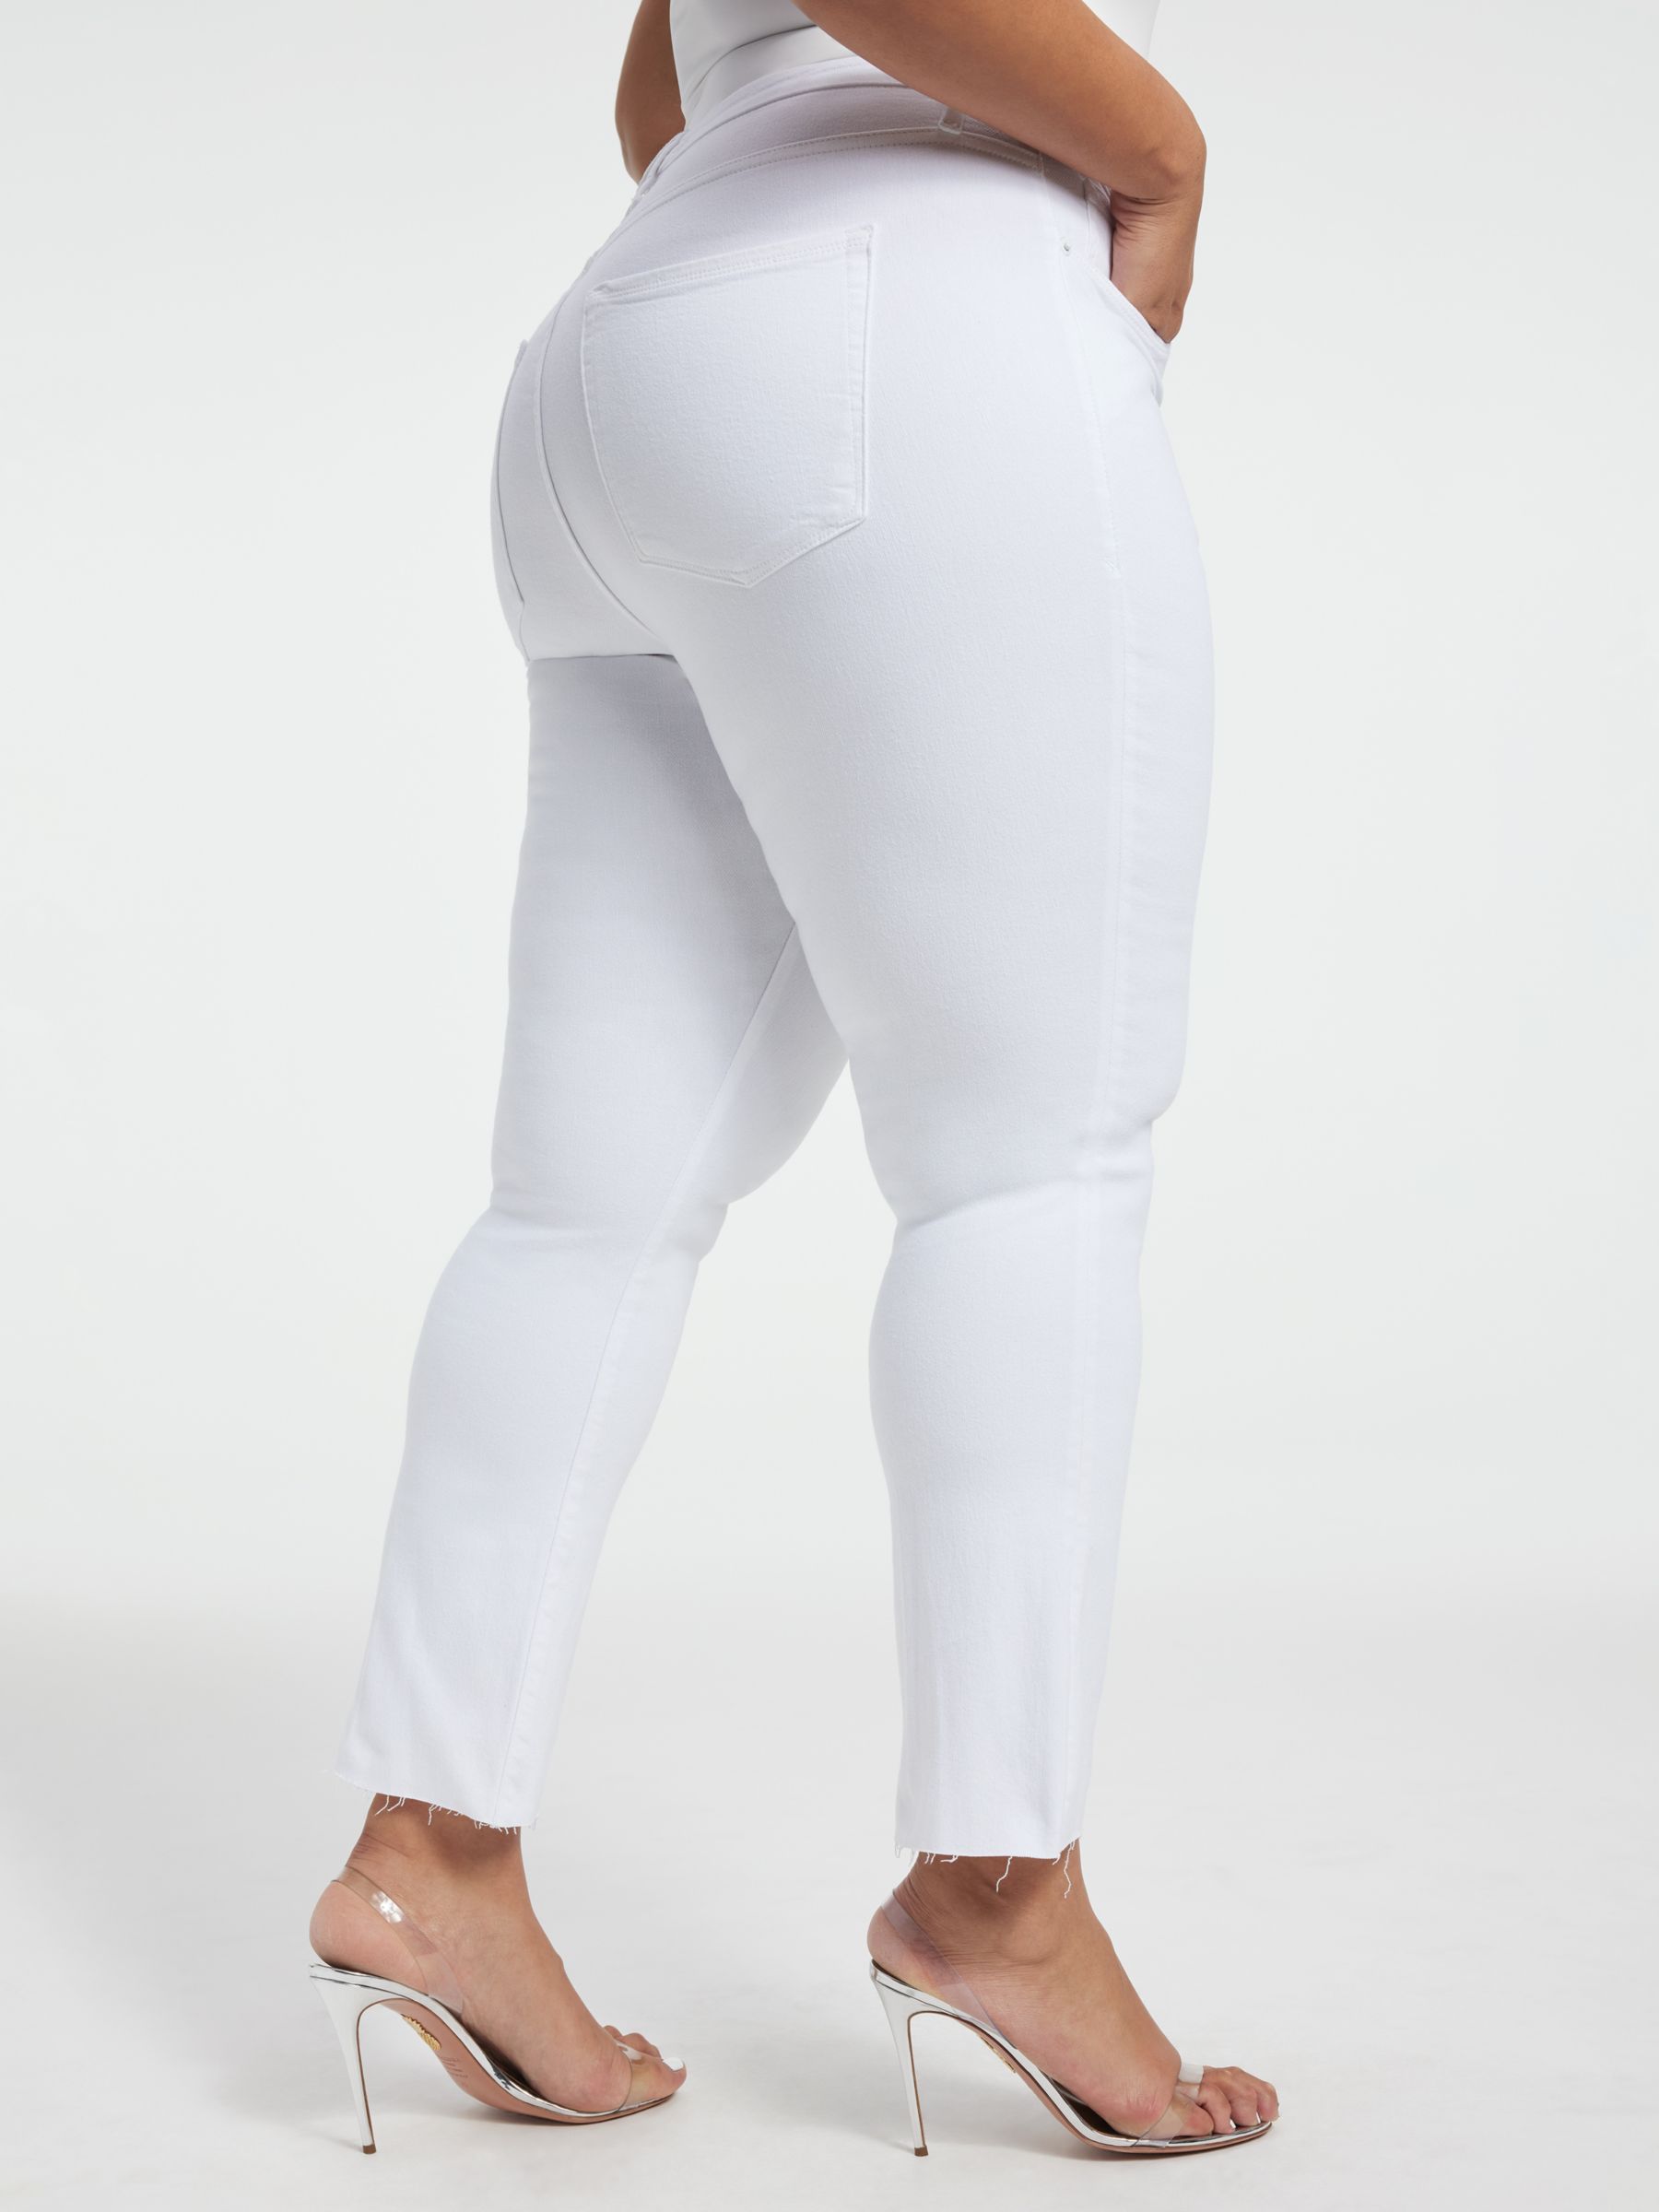 Buy Good American Good Straight Cut Raw Jeans, White Online at johnlewis.com